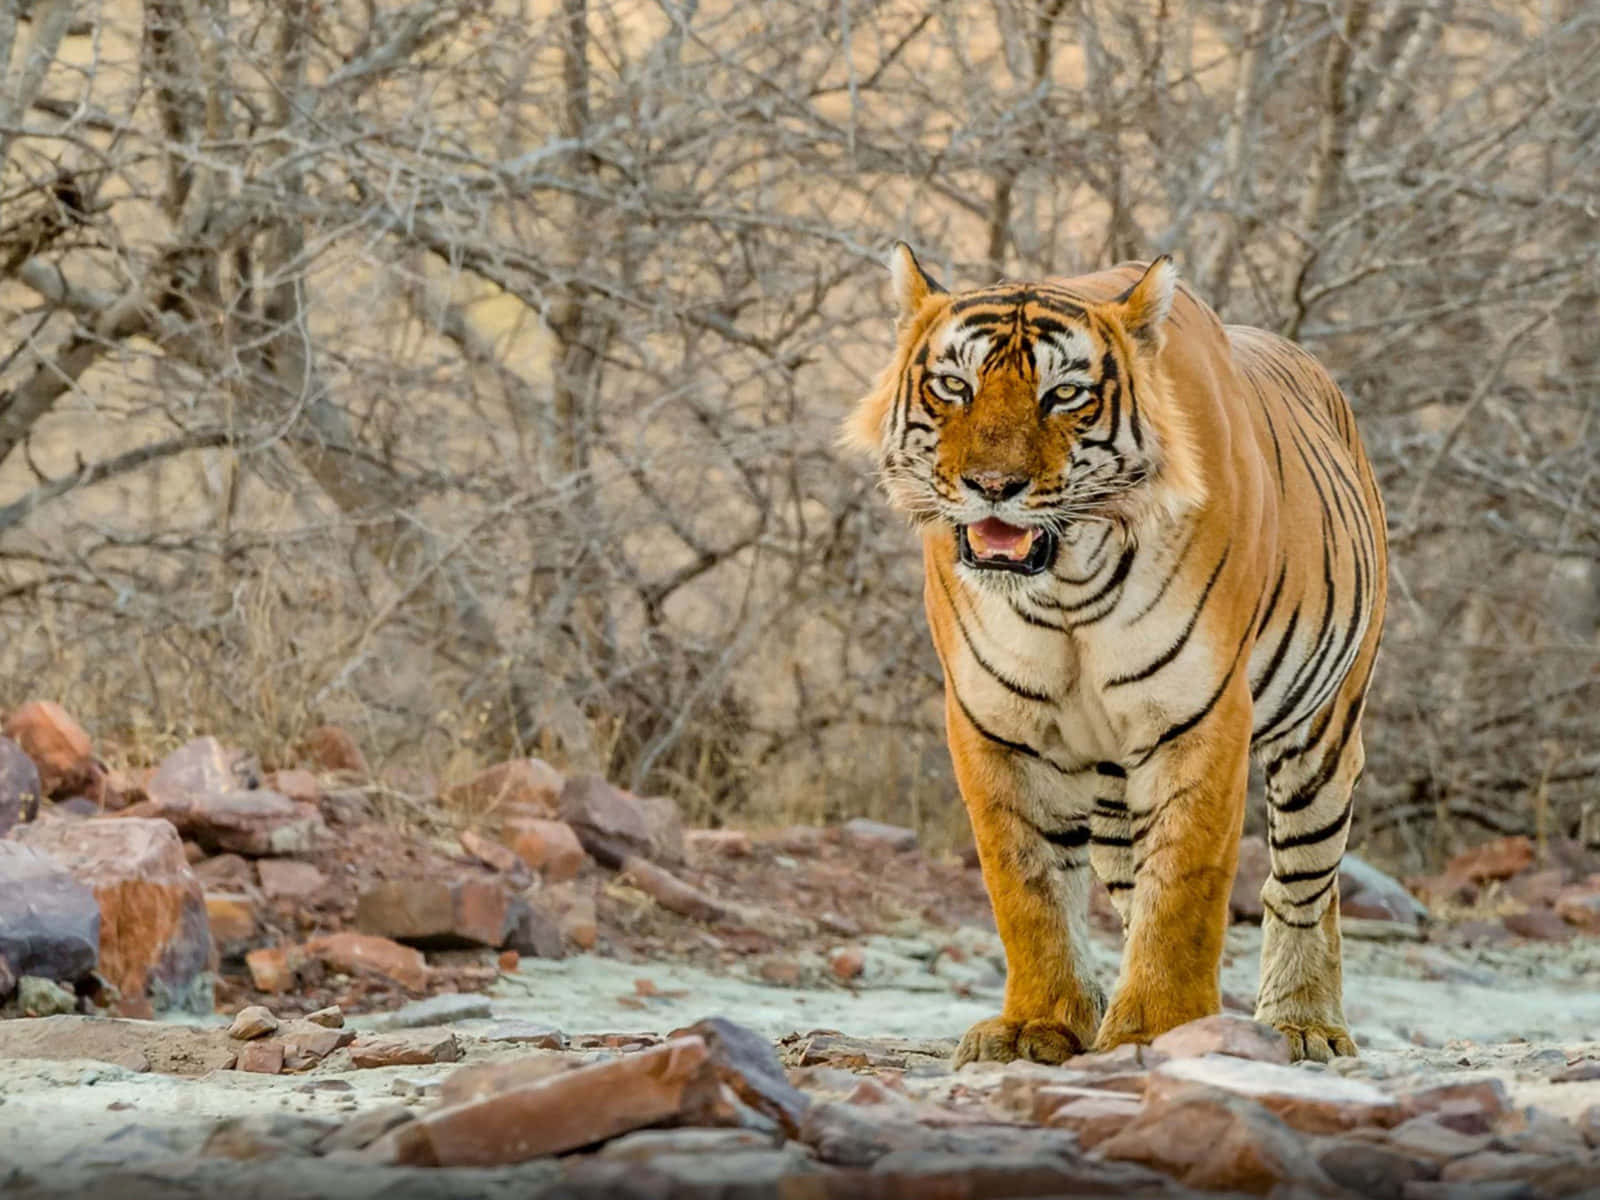 a tiger walking through the forest with rocks and trees